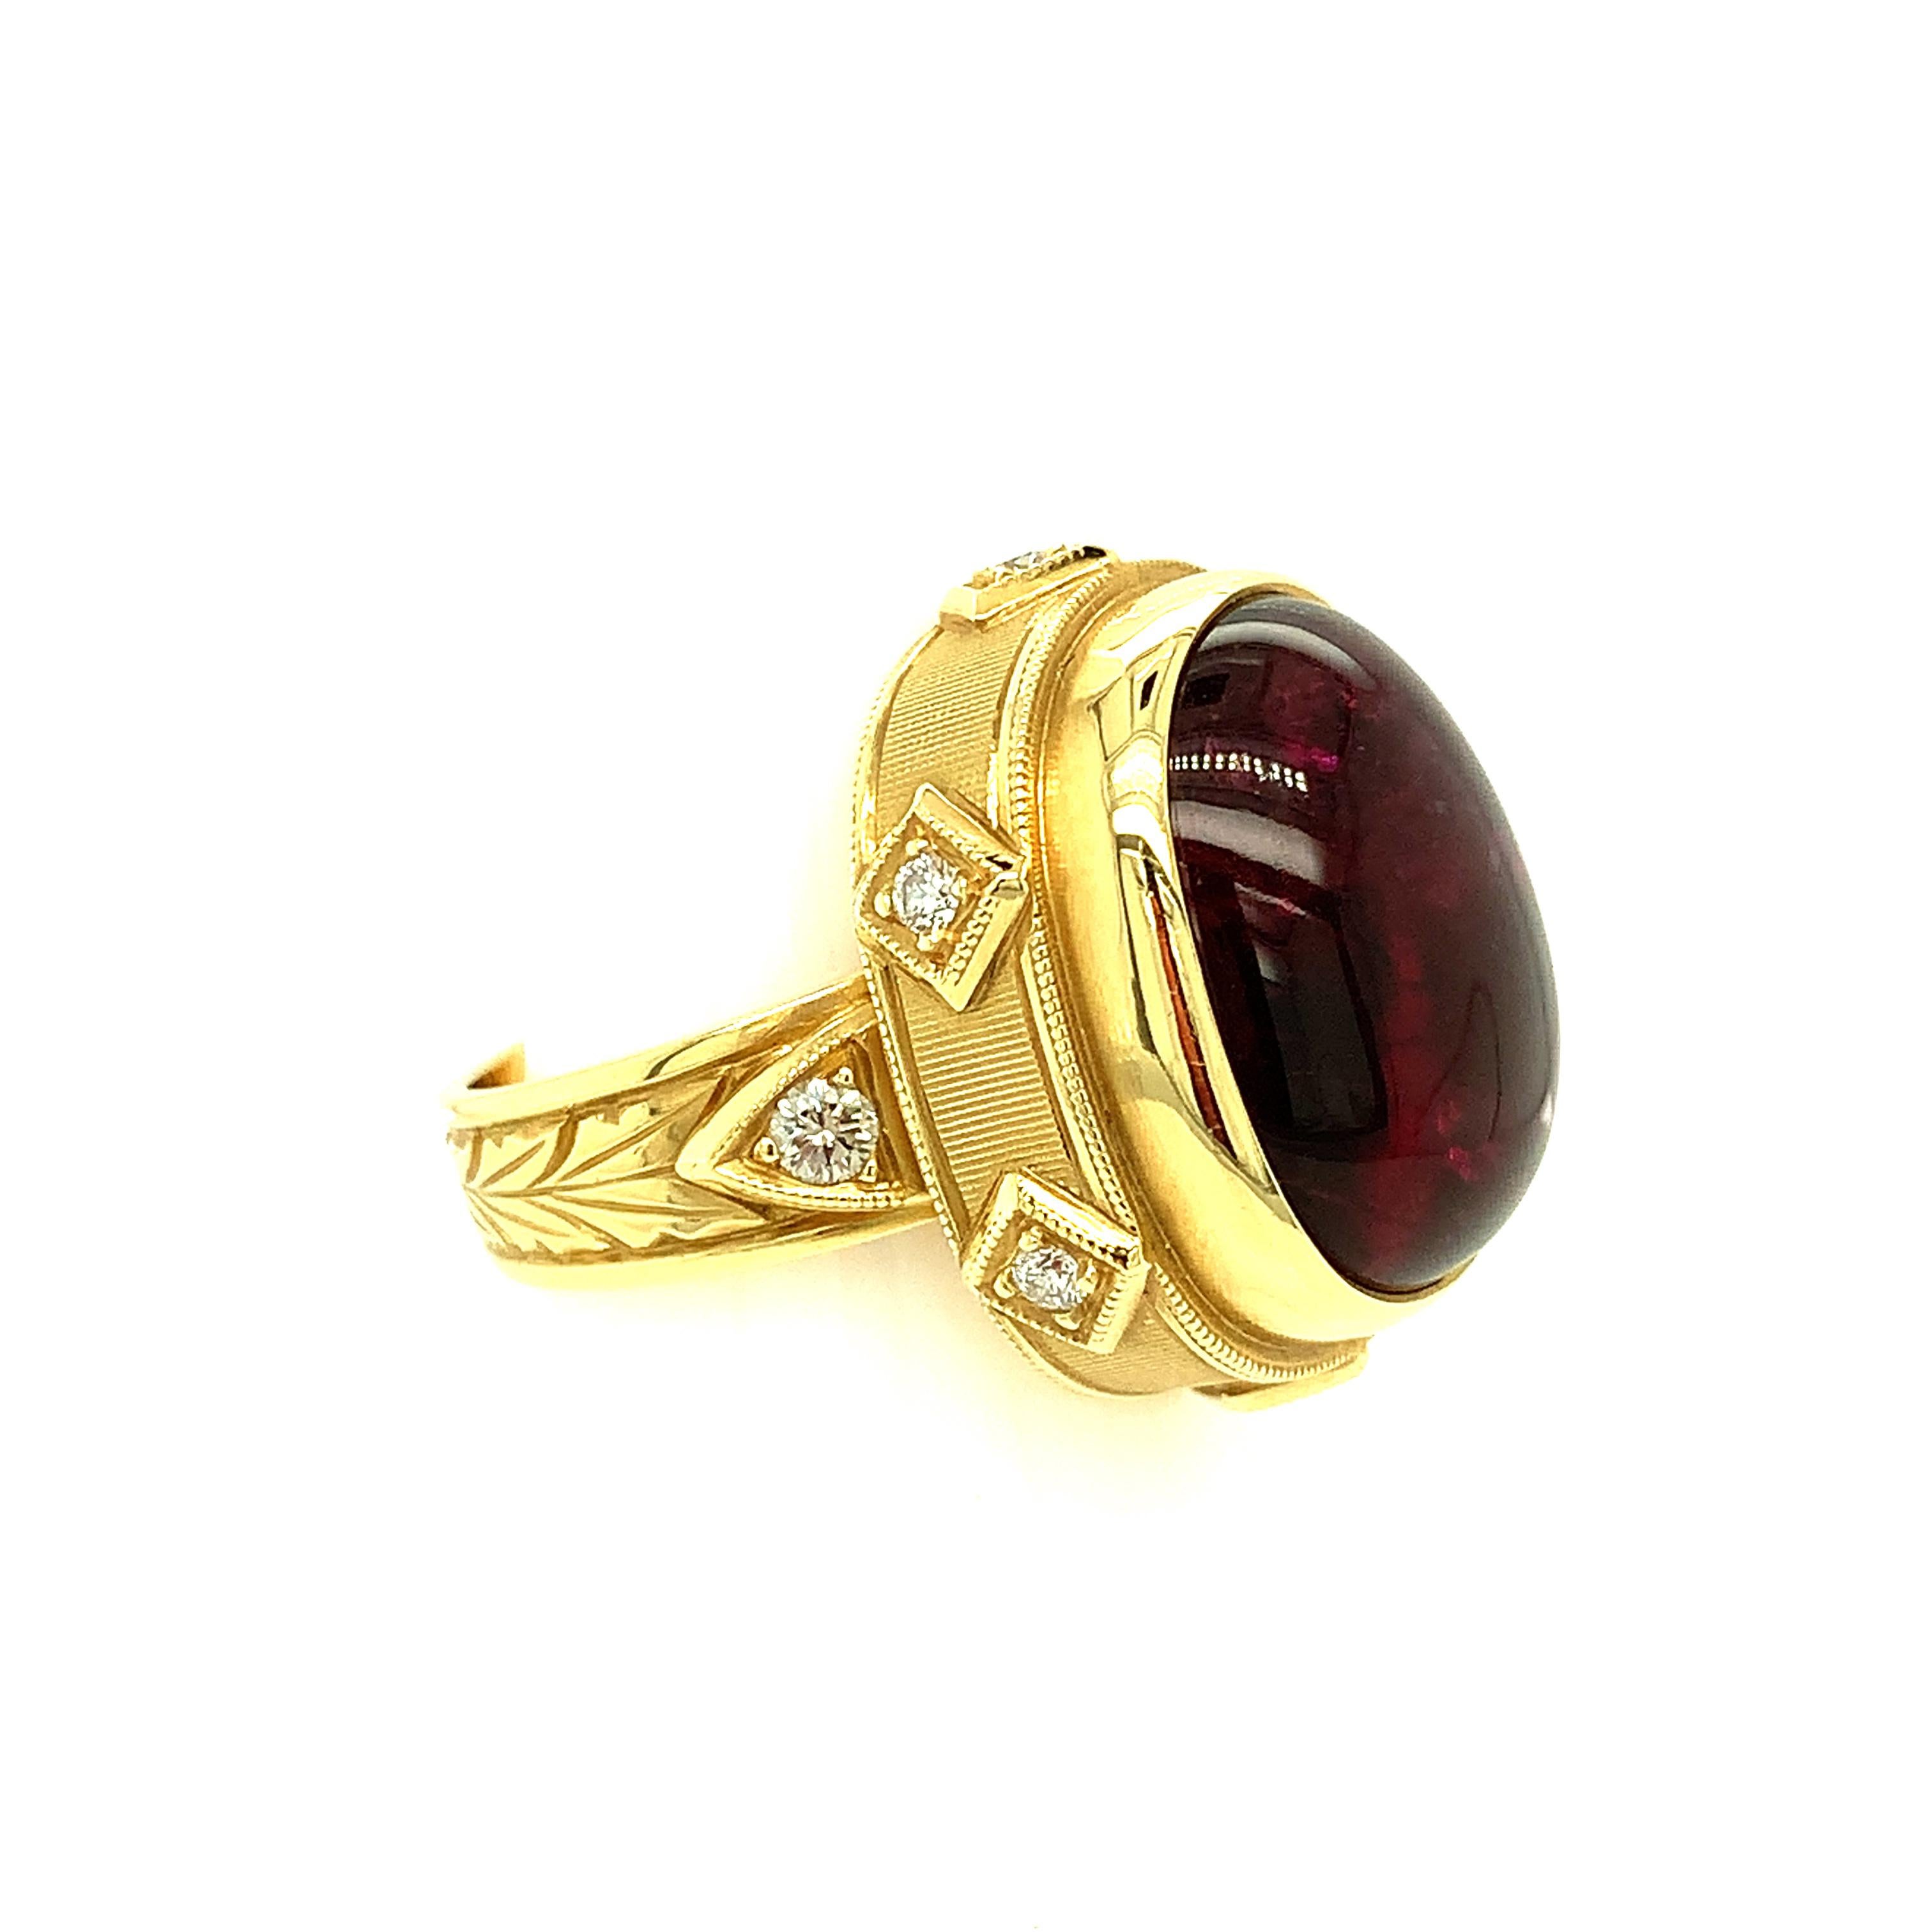 Artisan 18.98 ct. Rubellite Tourmaline Cabochon and Diamond Band Ring in 18k Yellow Gold For Sale